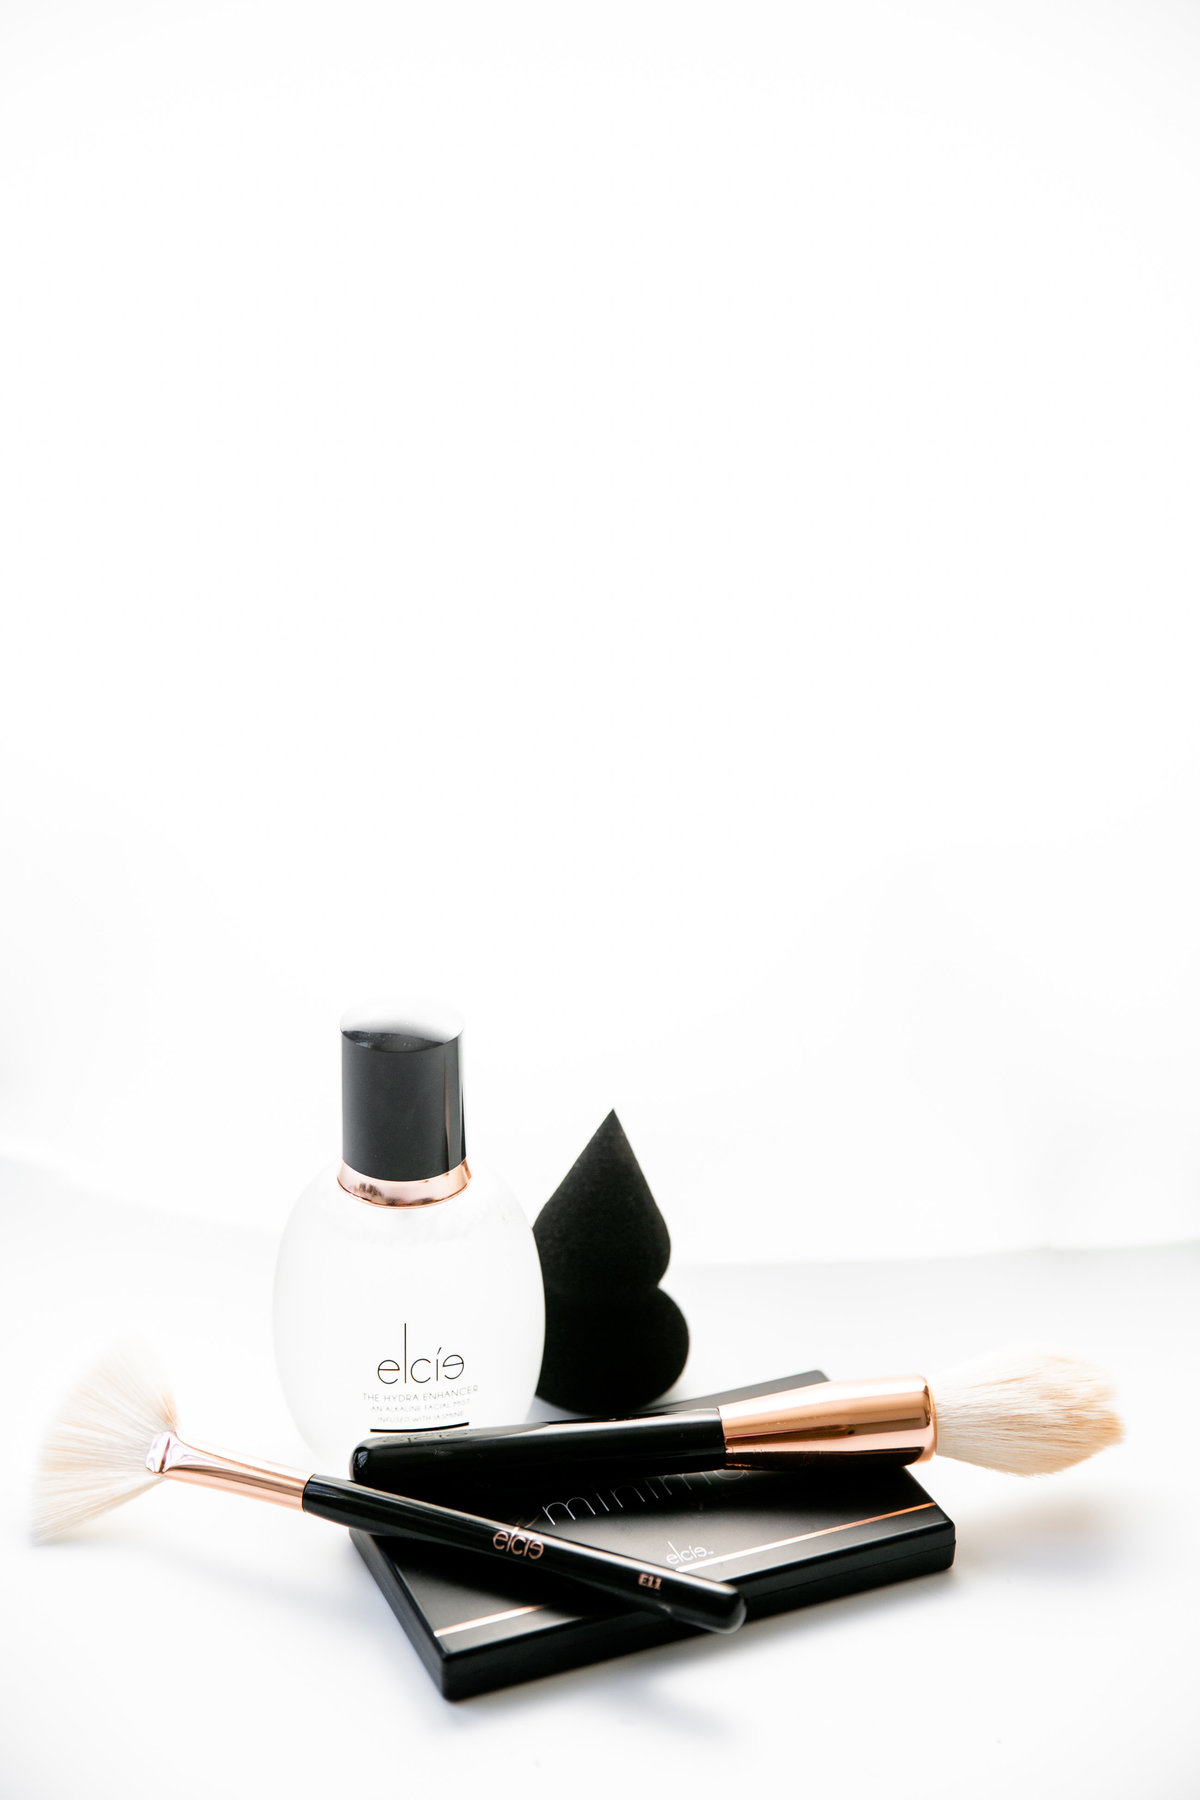 Karlie Colleen Photography - The Daily Concealer -50